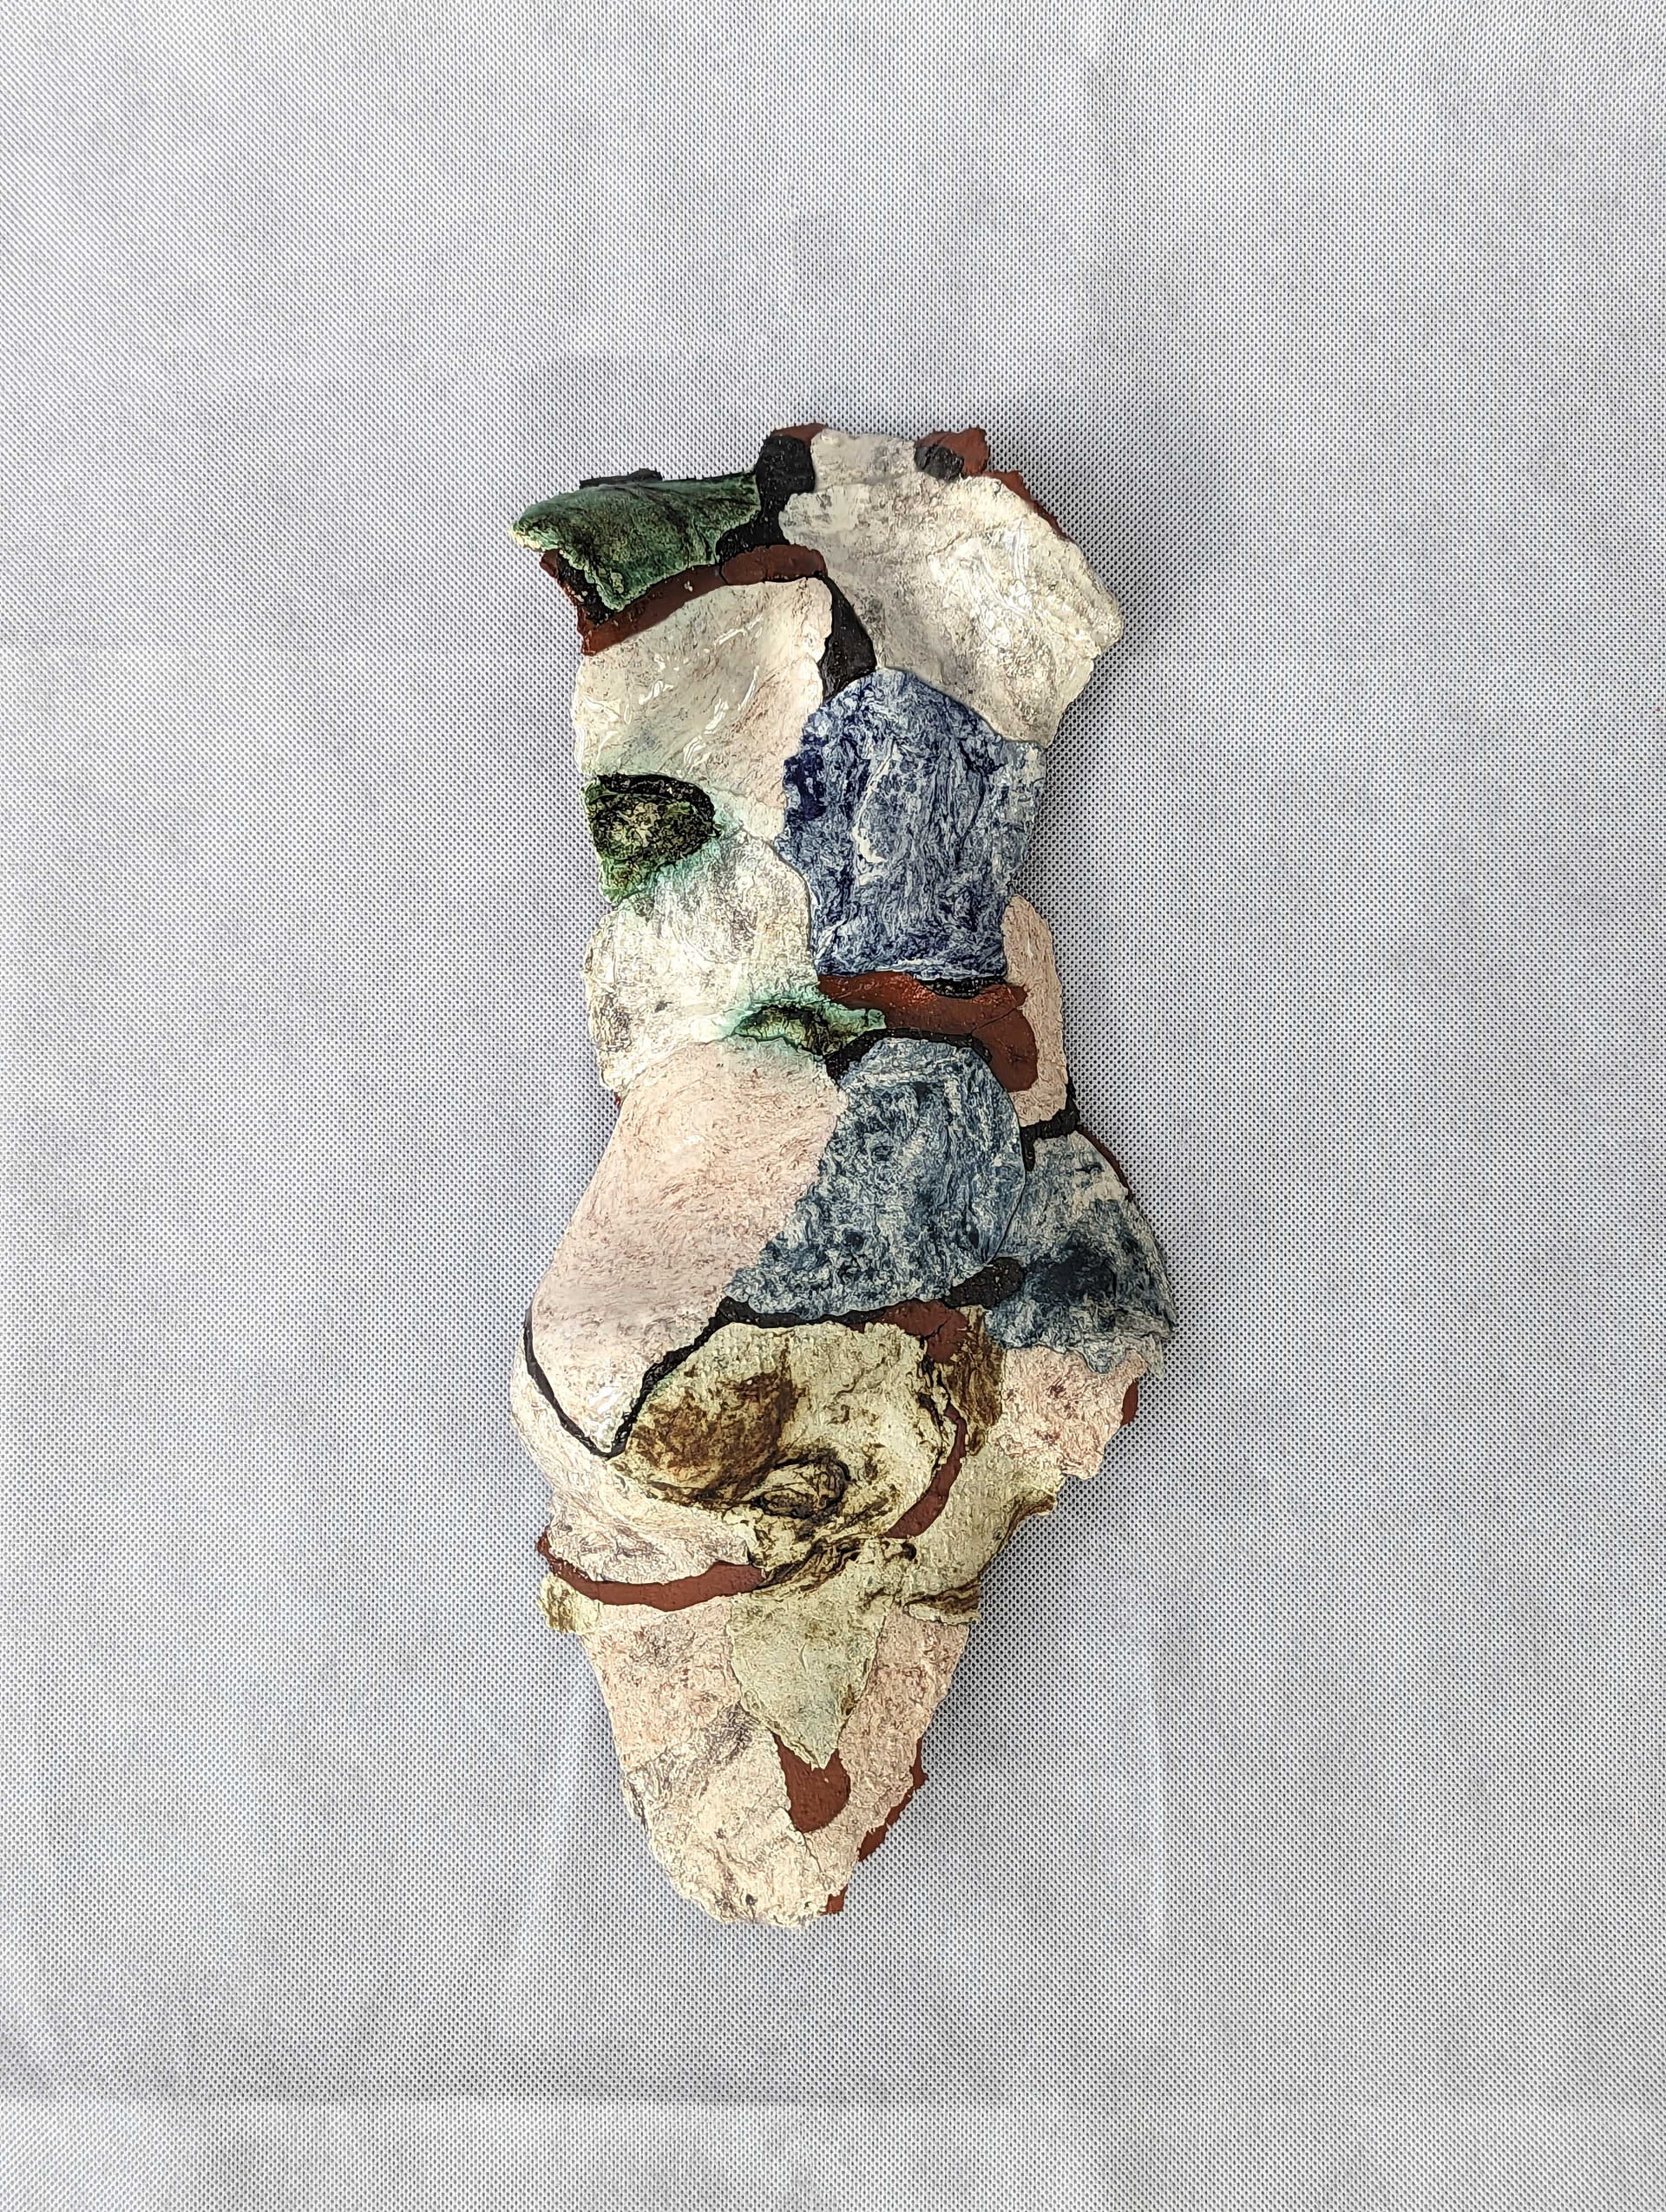 body with mixed clays,oxides and glaze